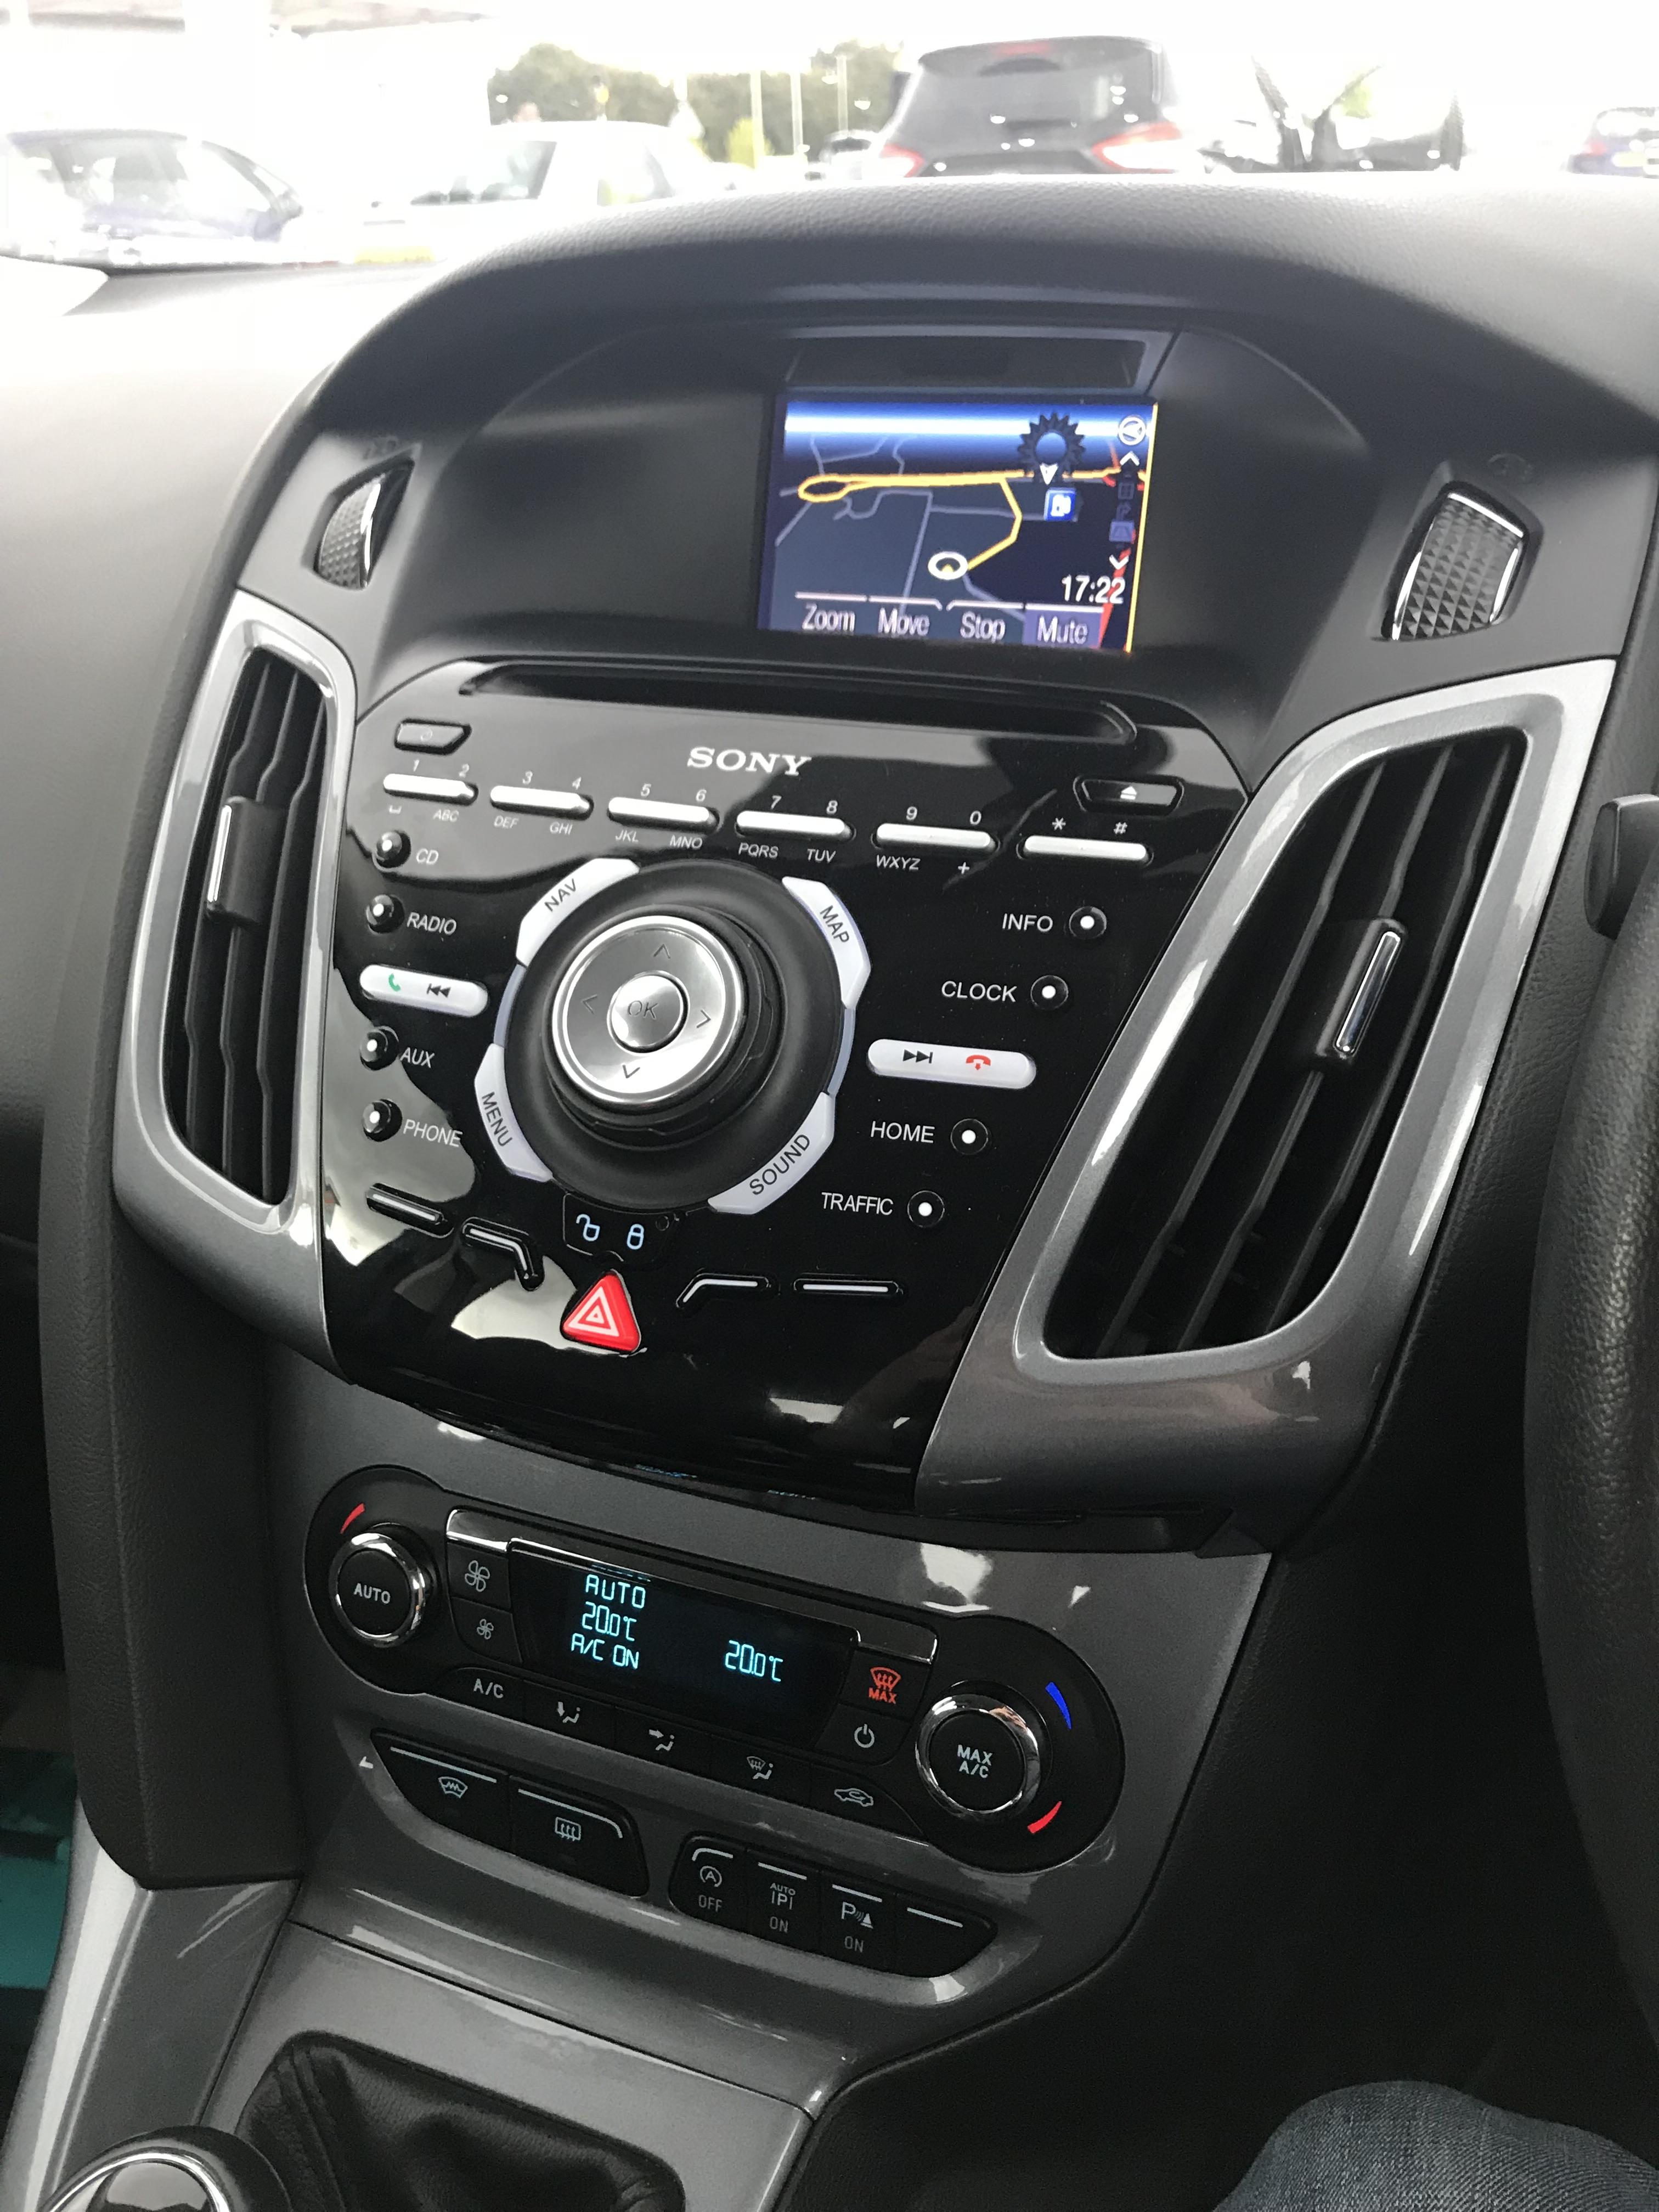 Touch Screen Upgrade | Ford Focus ST Forum